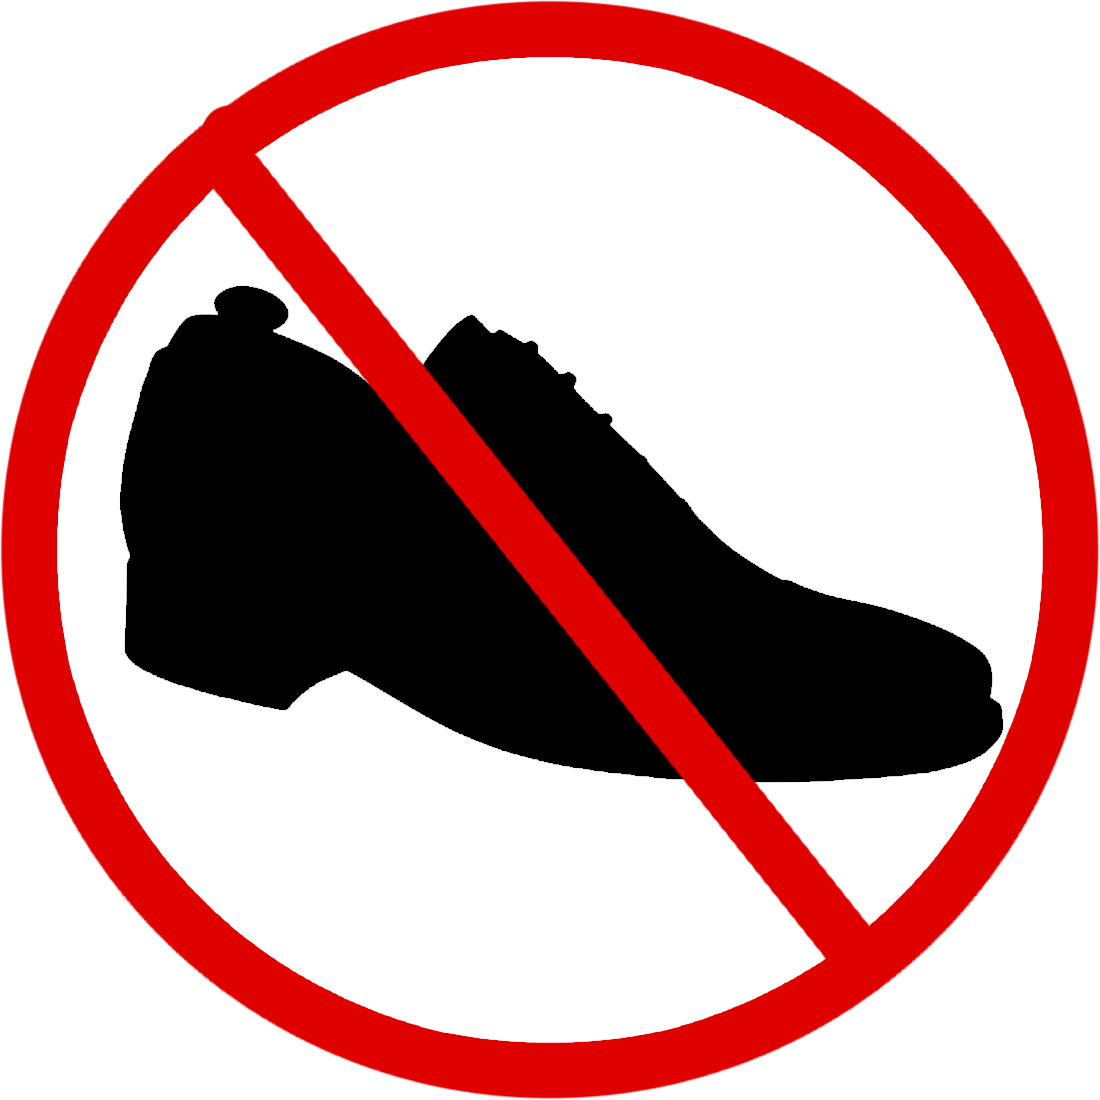 Shoes Allowed Clipart   Shoes Off Png - Avtocompany, Transparent background PNG HD thumbnail